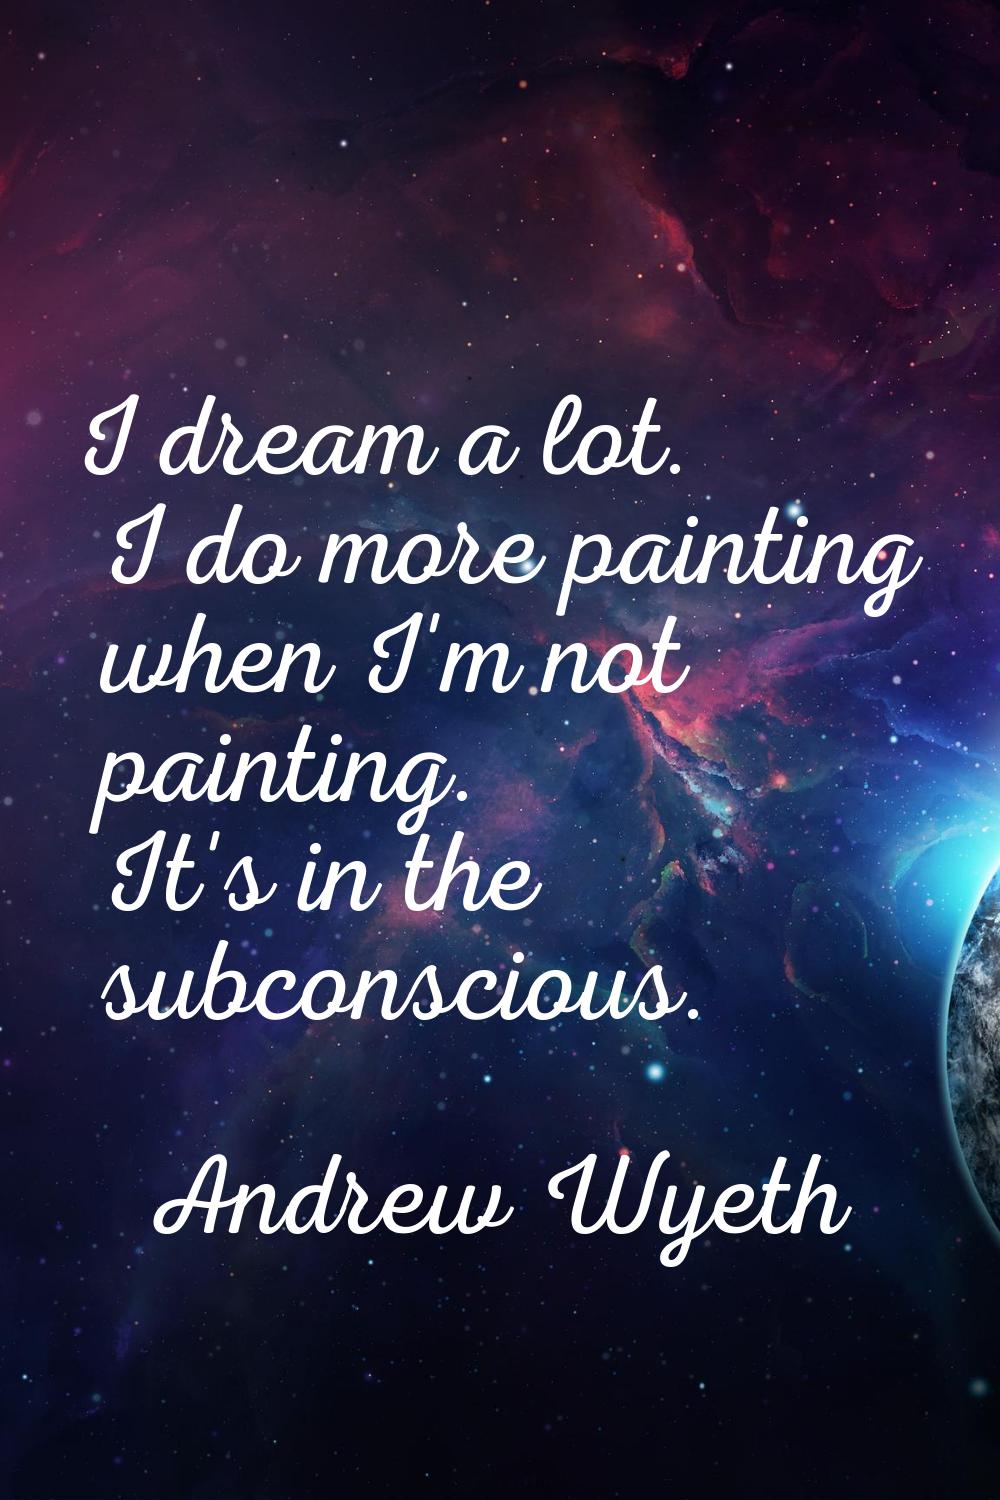 I dream a lot. I do more painting when I'm not painting. It's in the subconscious.